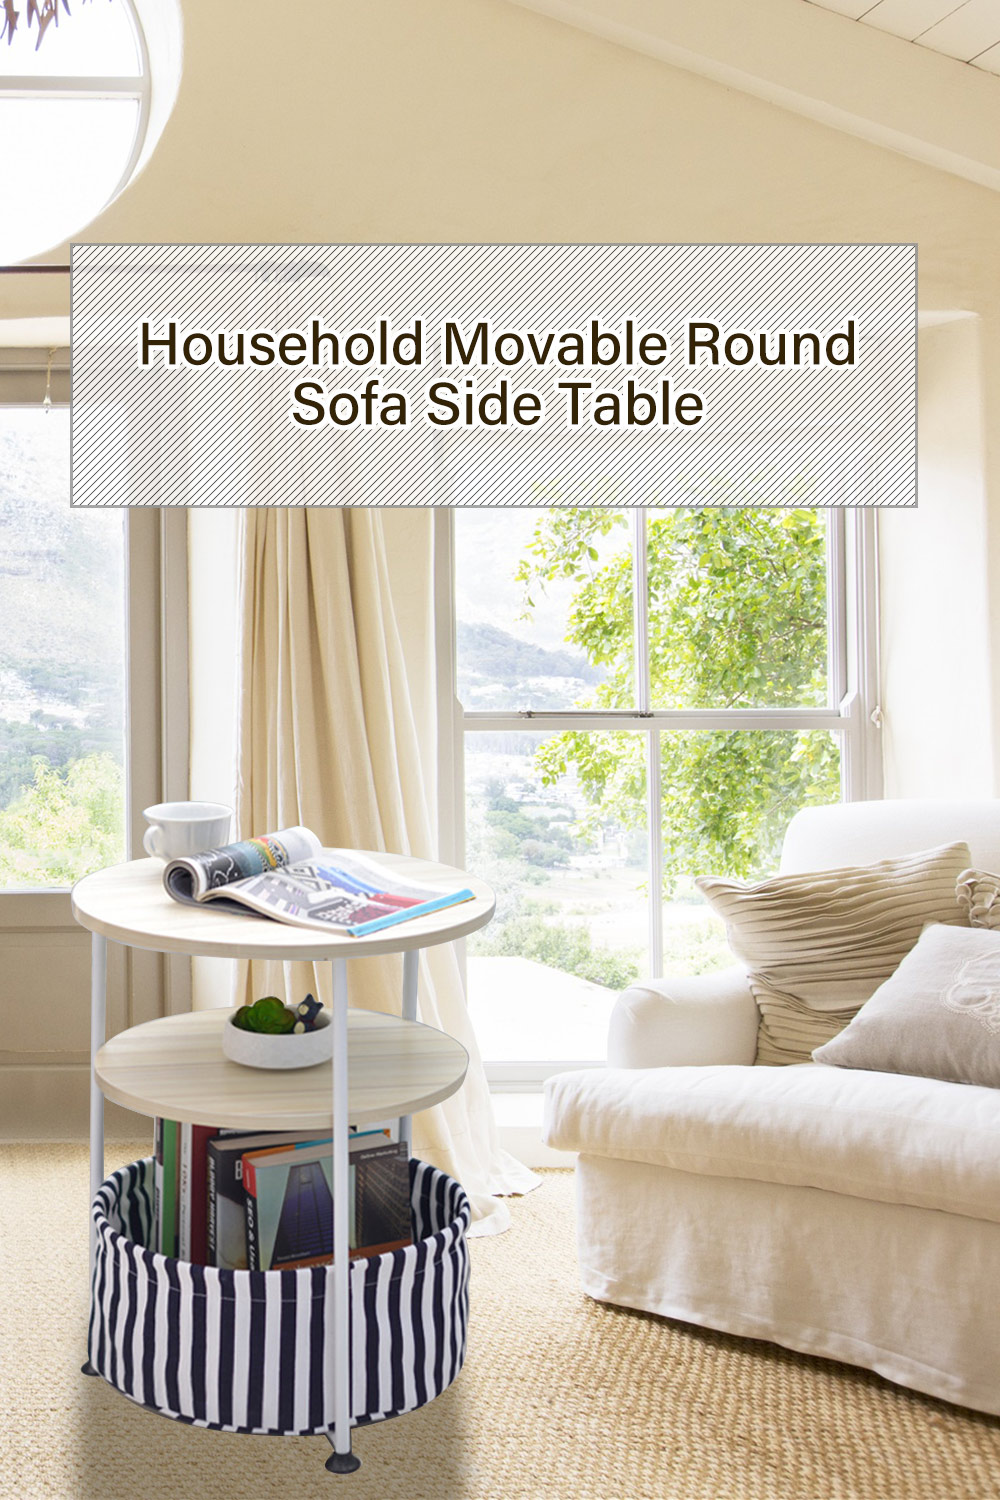 Household Movable Round Sofa Side Table